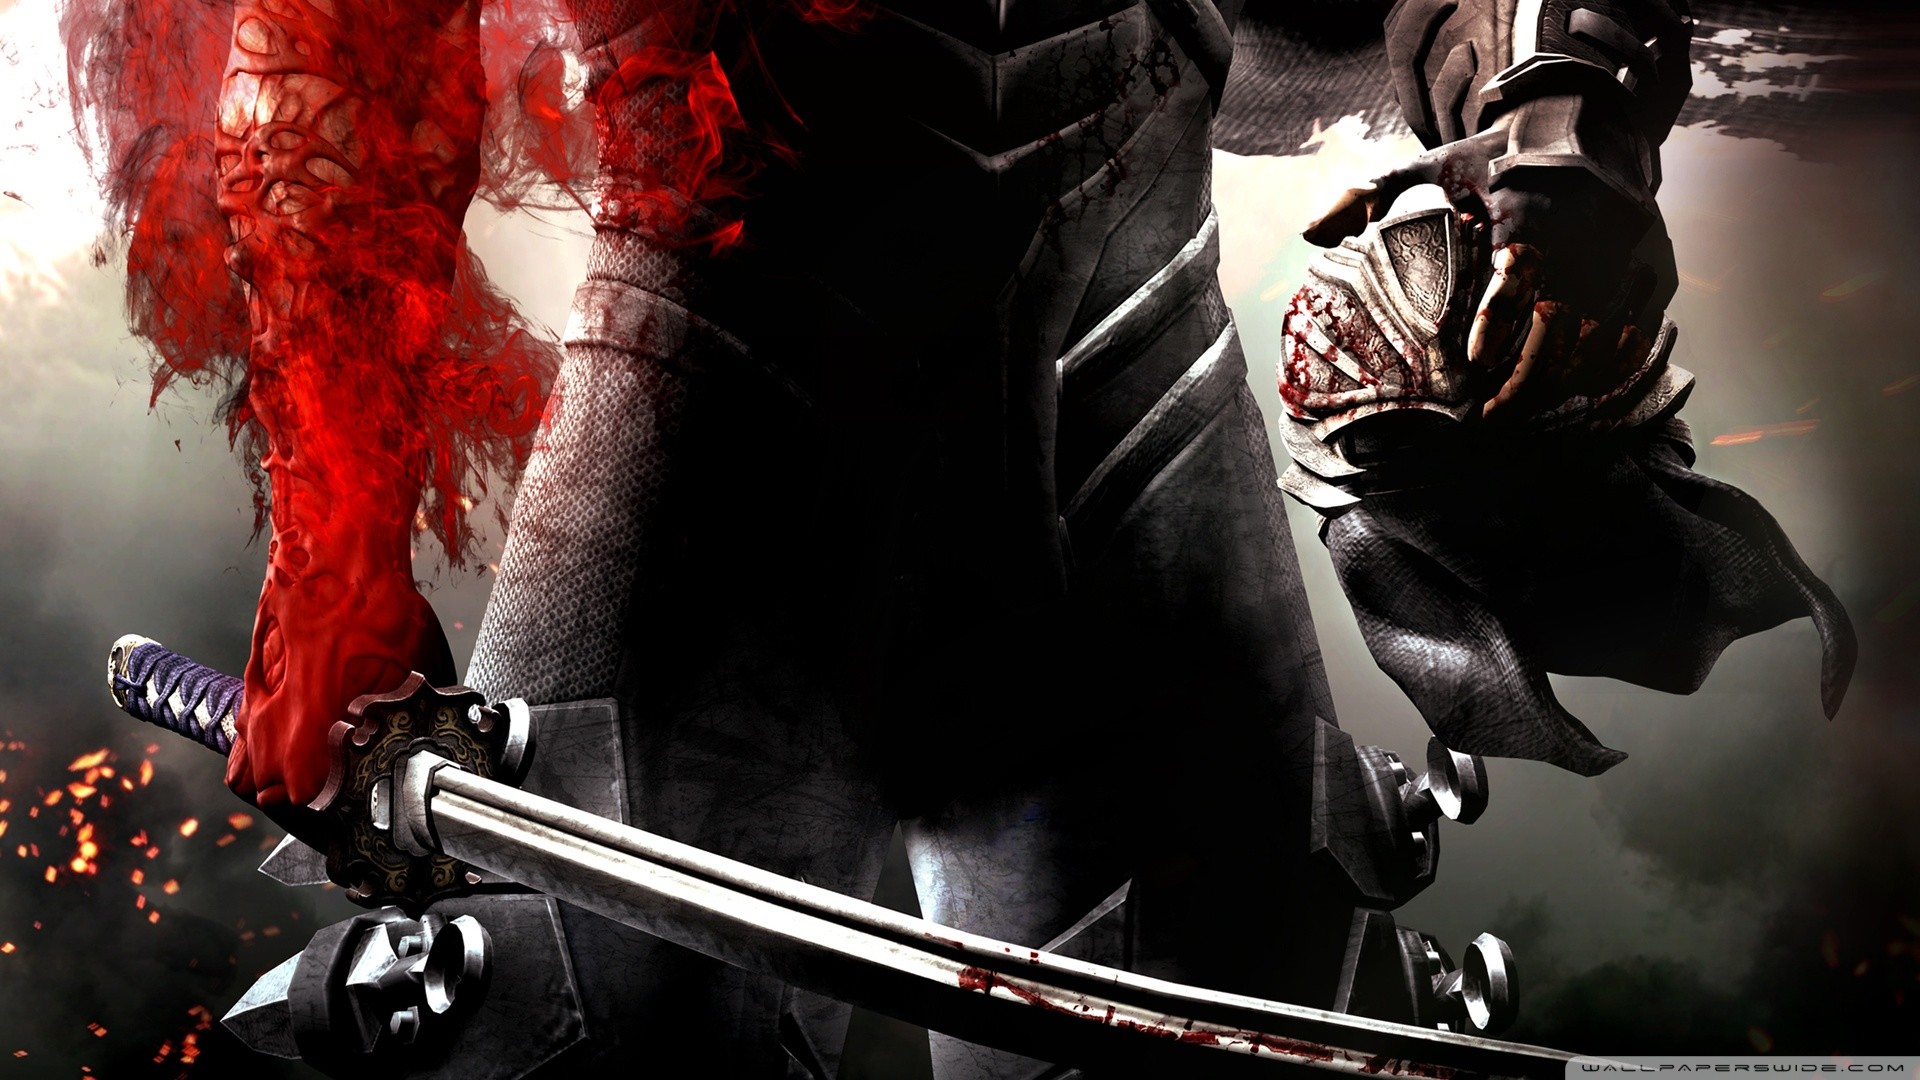 1920x1080 Find out: Ryu Hayabusa in Ninja Gaiden 3 wallpaper on http | Images  Wallpapers | Pinterest | Wallpaper